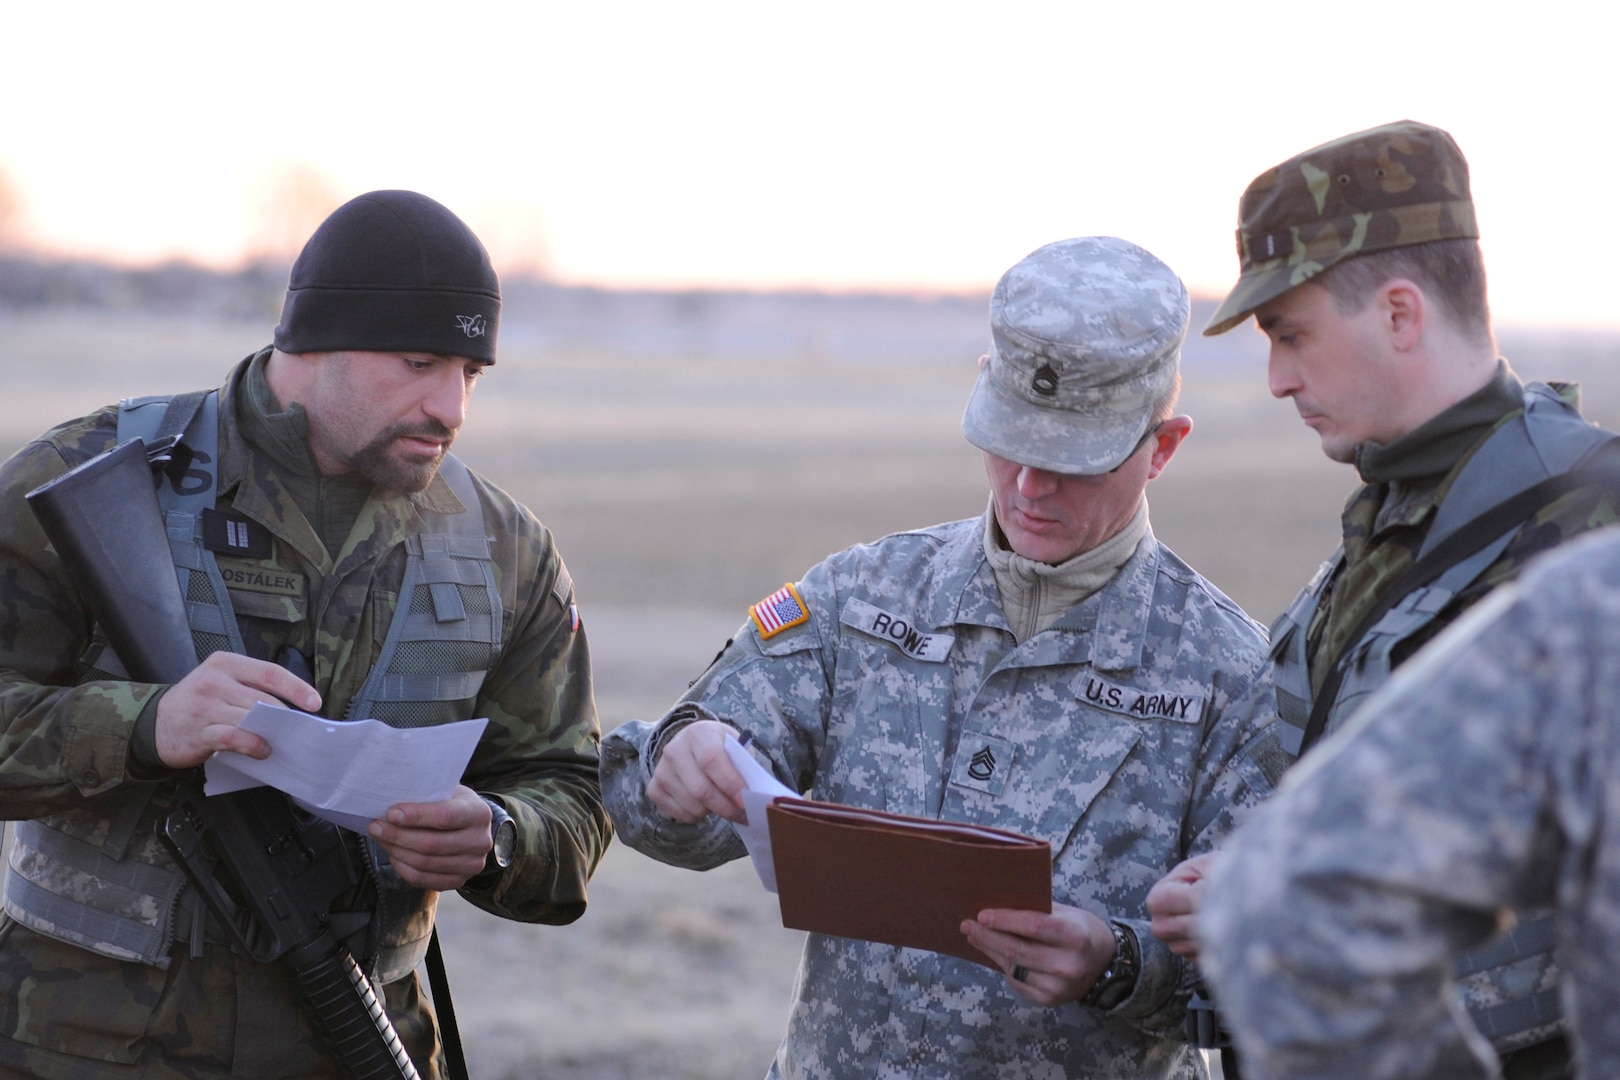 Senior Master Sgt. Karel Dostalek and Master Sgt. Vaclav Bergman, Airmen in the Czech Republic Armed Forces, get instructions from Nebraska Army National Guard Sgt. 1st Class Chad Rowe on how to maneuver the land navigation course during the state's Best Warrior competition, March 3, 2017, at Greenlief Training Site. Dostalek and Bergman were two of three Czech service members who visited Nebraska to observe and participate in the Nebraska Army National Guard’s Best Warrior competition through the State Partnership Program.